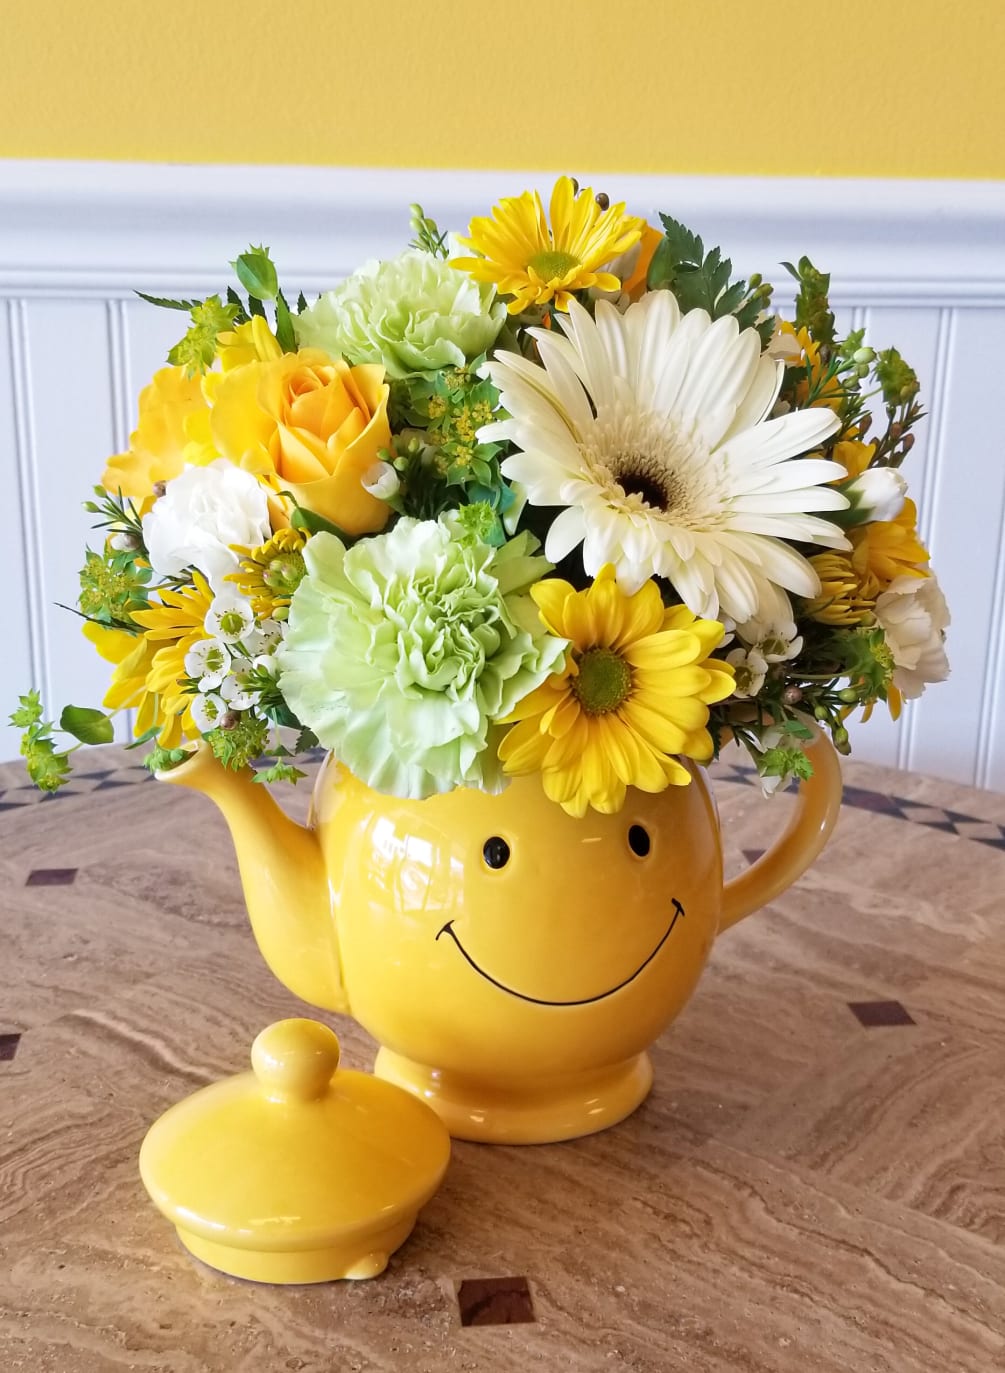 Send this adorable yellow smiley tea kettle filled with bright and sunny